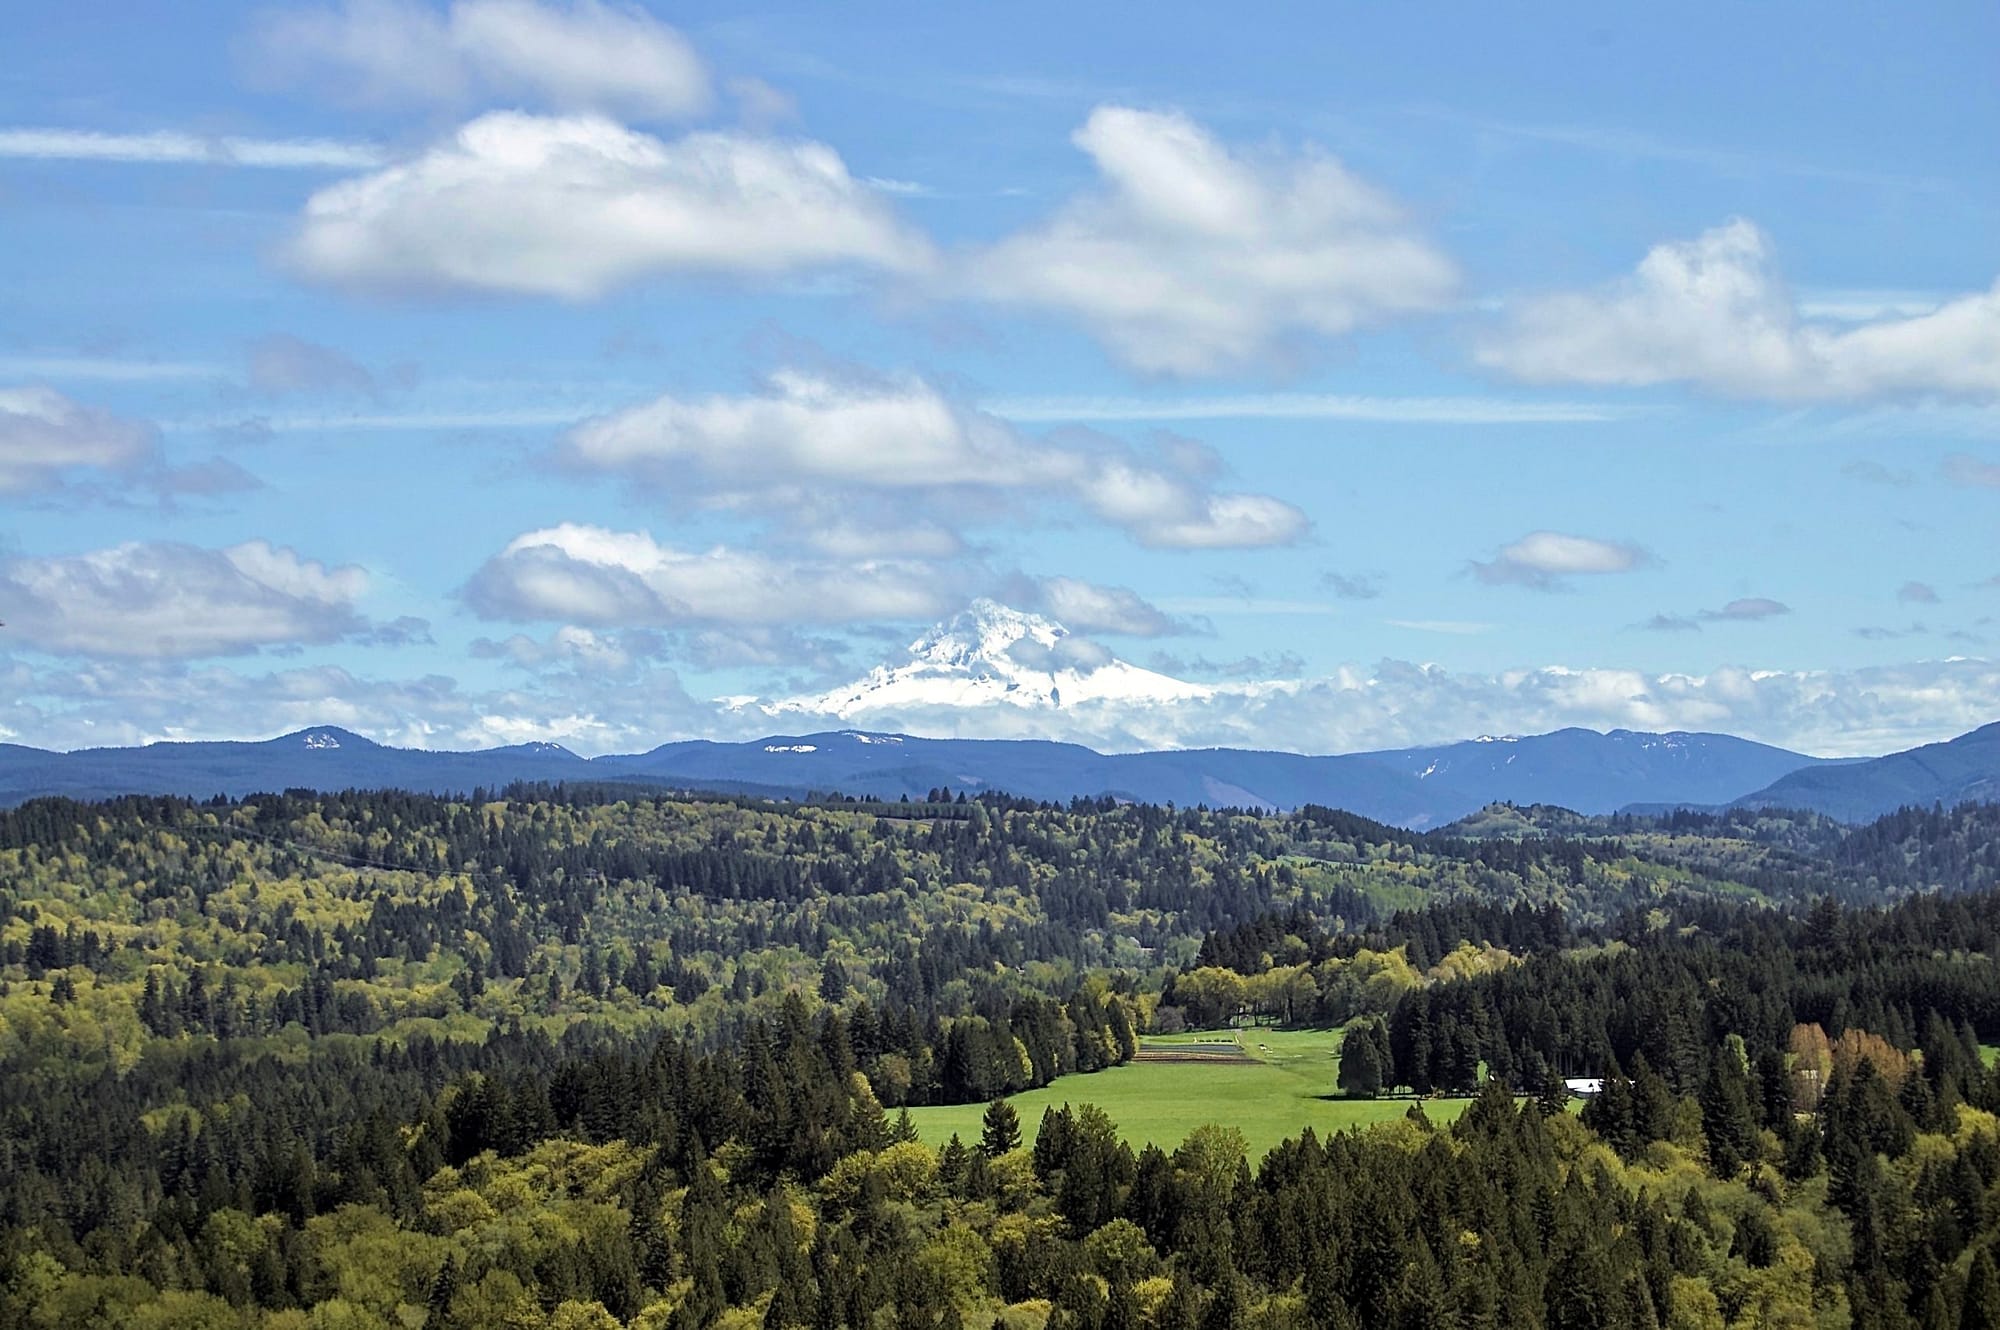 A small break in the clouds for Mt. Hood to appear as seen from Sandy, Oregon